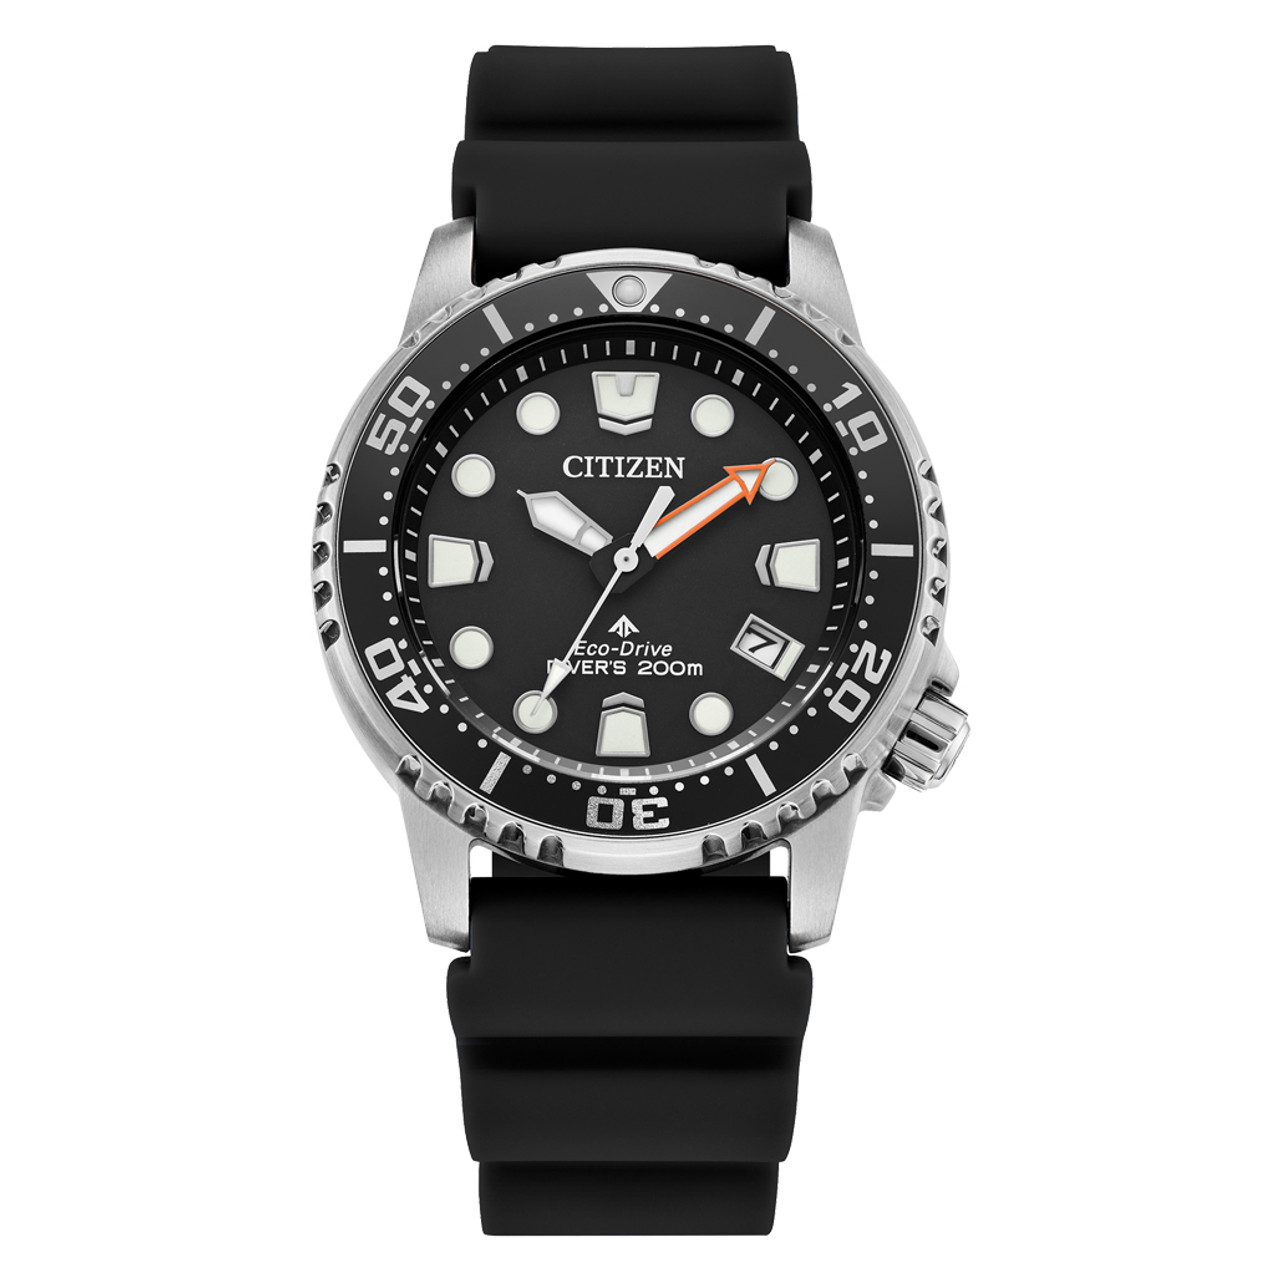 Citizen Promaster 36.5mm Solar Dive Watch with Black Dial #EO2020-08E